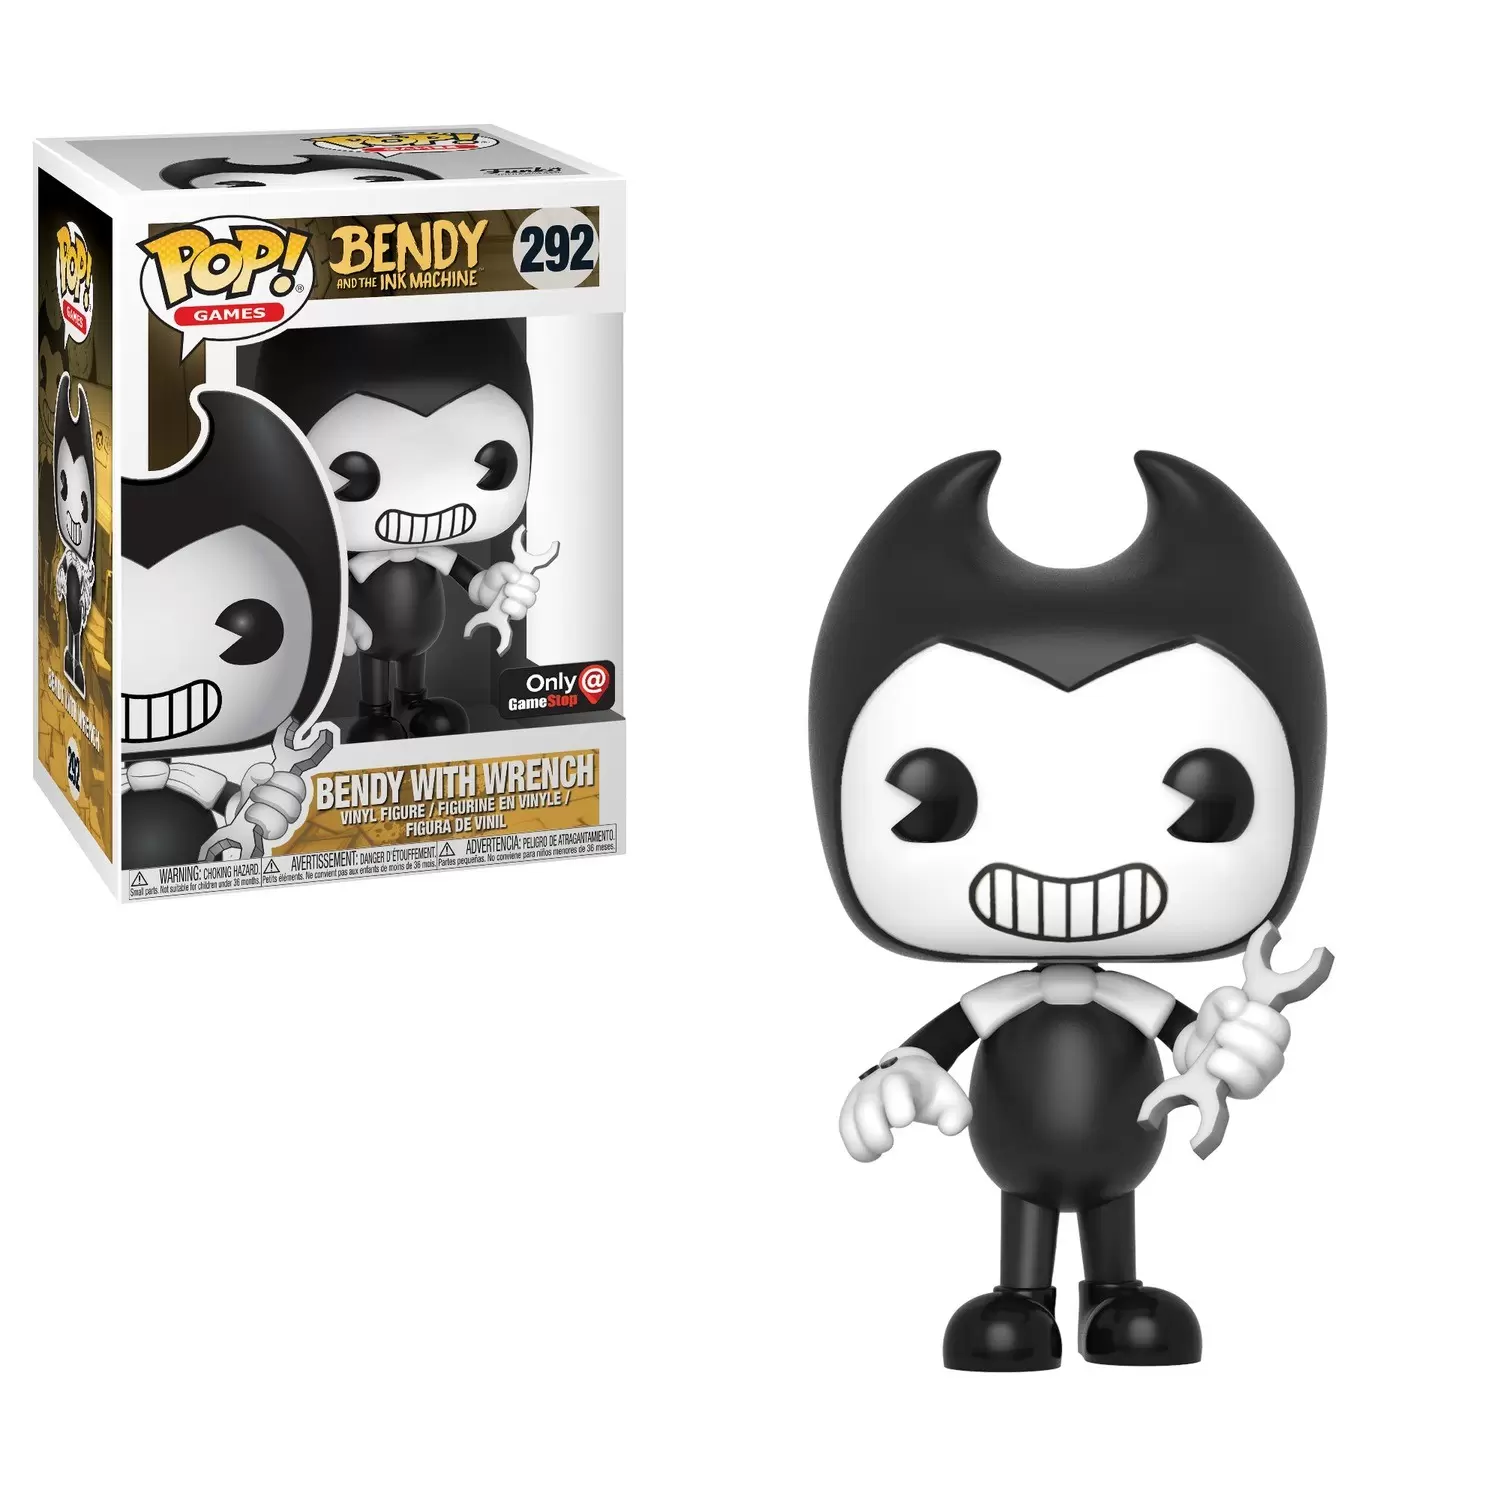 POP! Games - Bendy and The Ink Machine - Bendy with Wrench